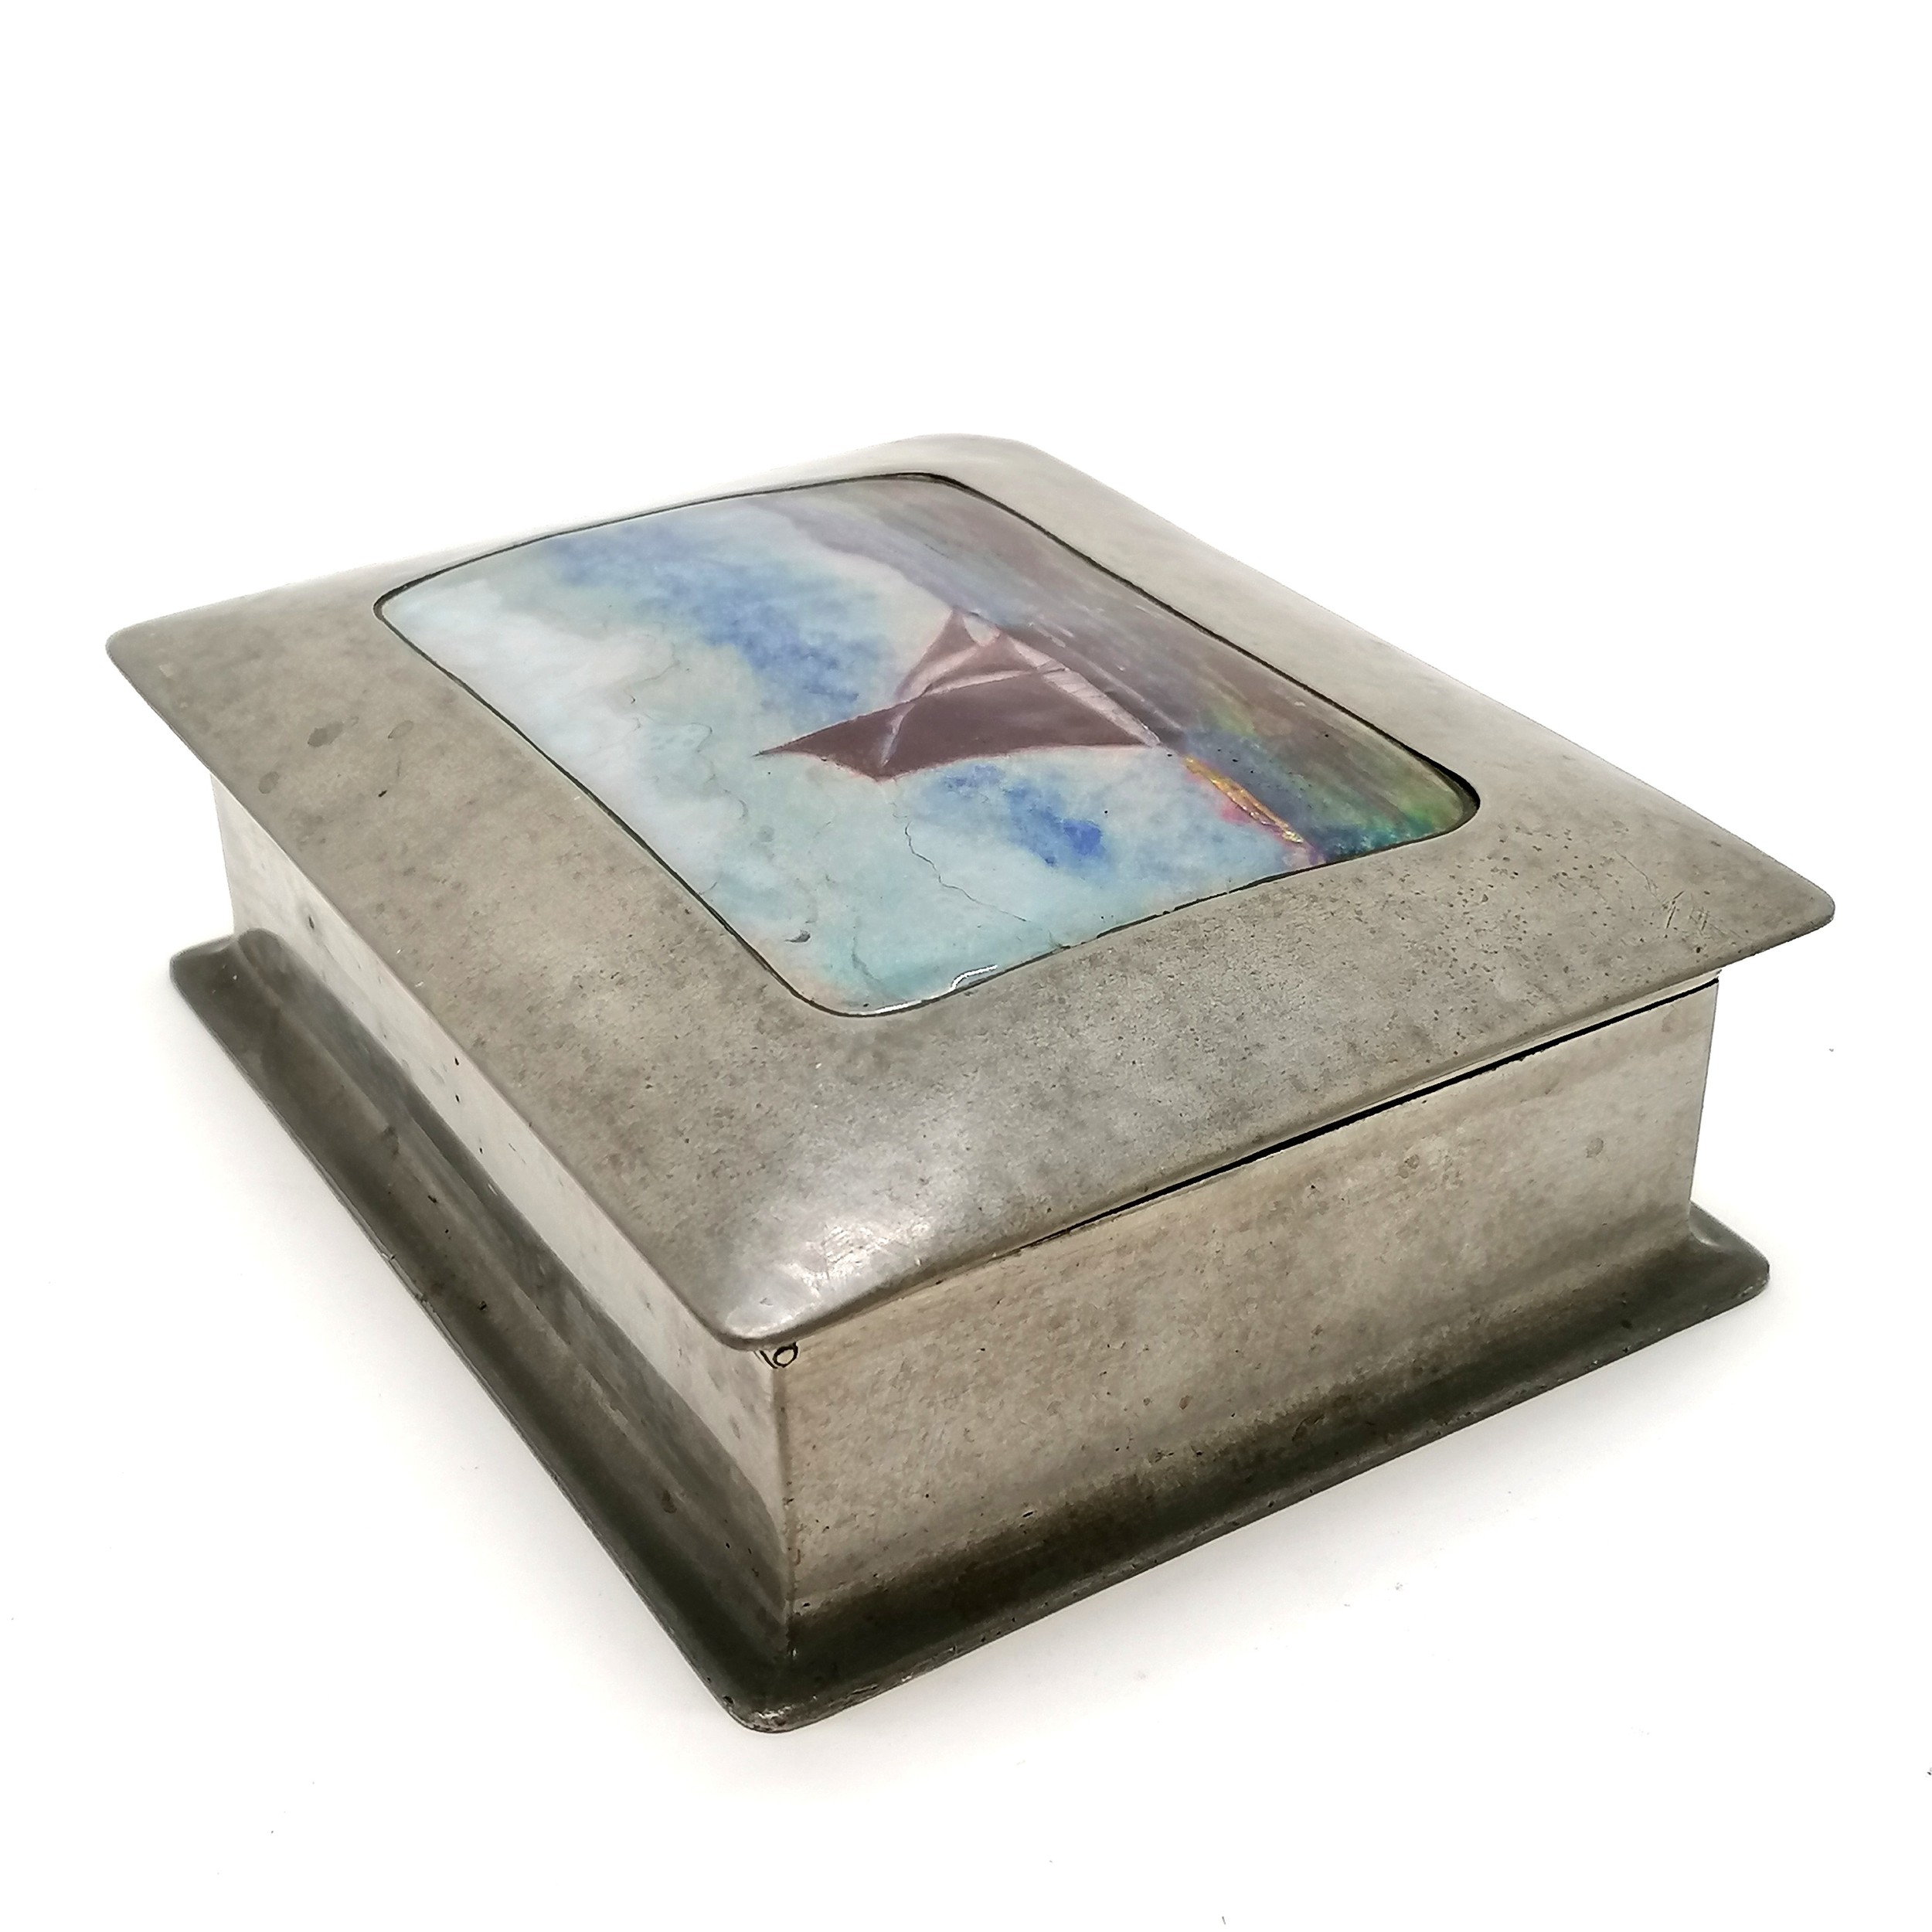 Liberty & Co : Tudric pewter Arts & Crafts jewellery box #083 with inset enamel plaque depicting - Image 3 of 8